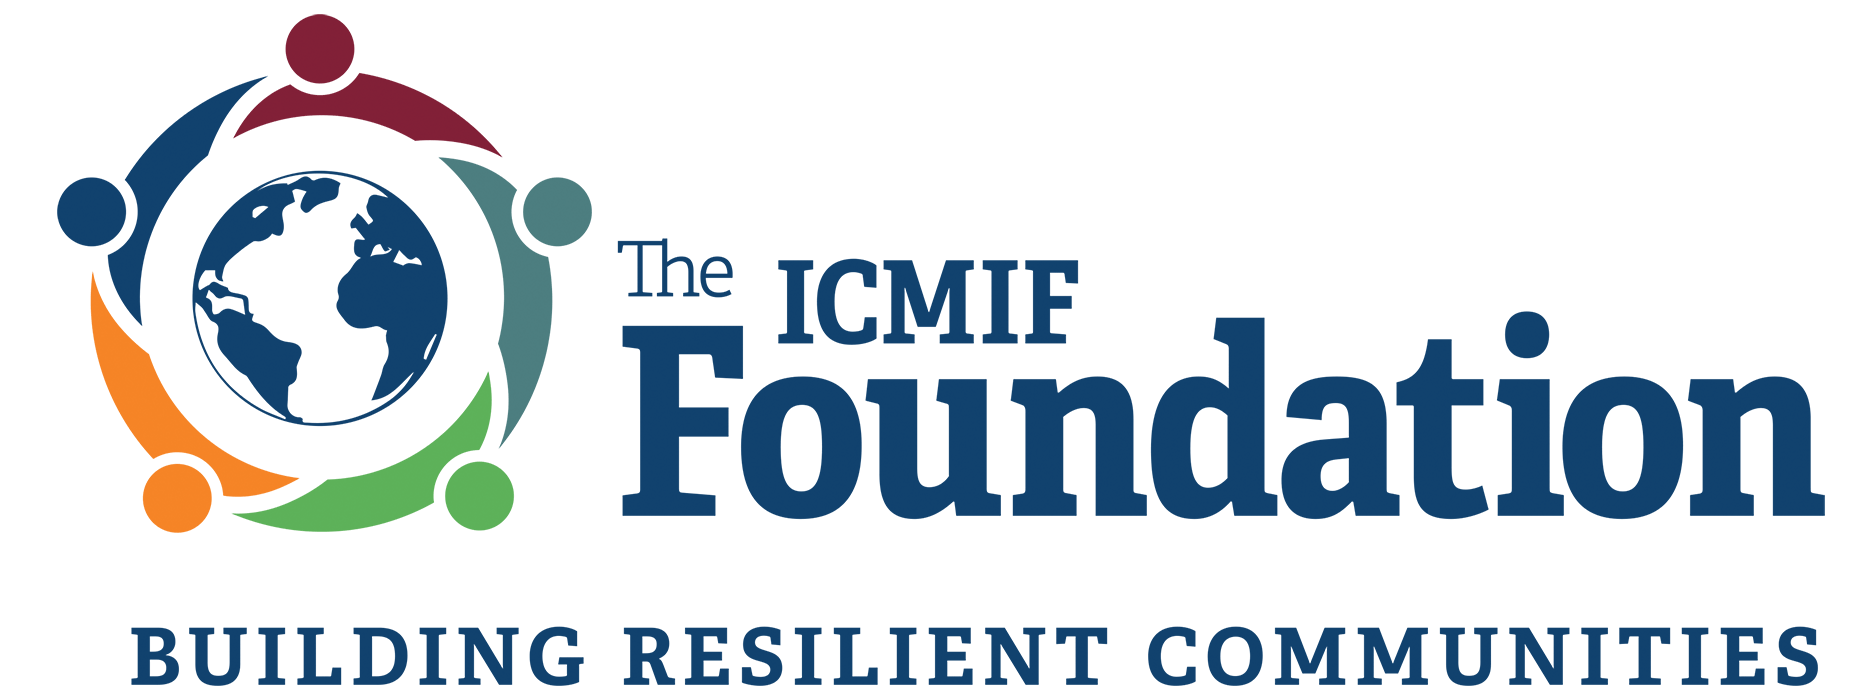 https://icmiffoundation.org/wp-content/uploads/2023/01/cropped-The-ICMIF-Foundation-logo-1-1-1.png